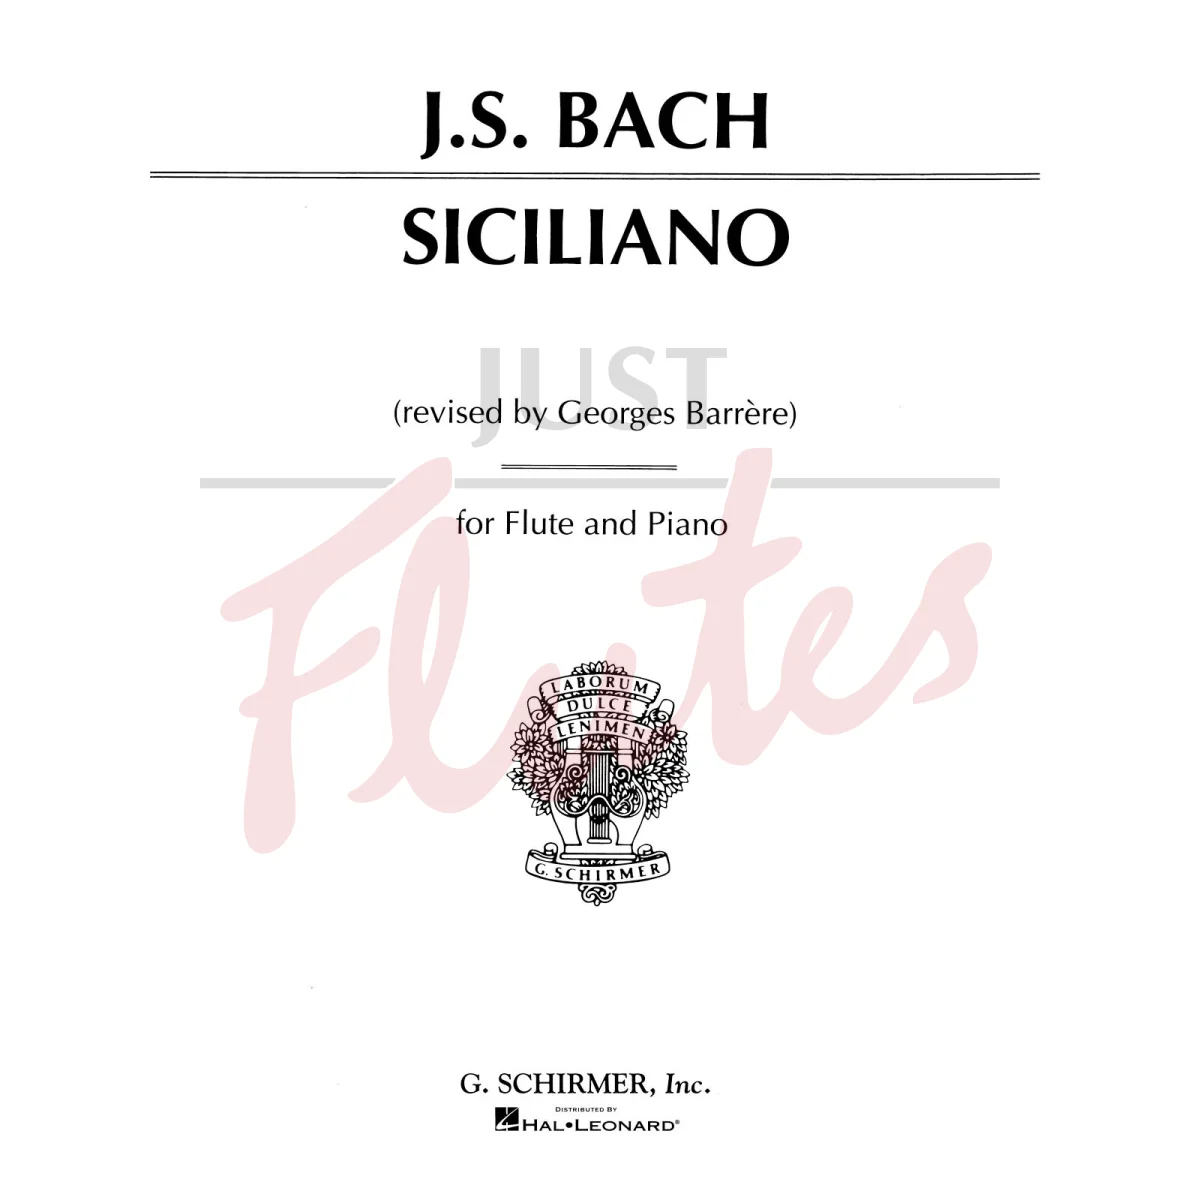 Siciliano from the 2nd Flute Sonata for Flute and Piano